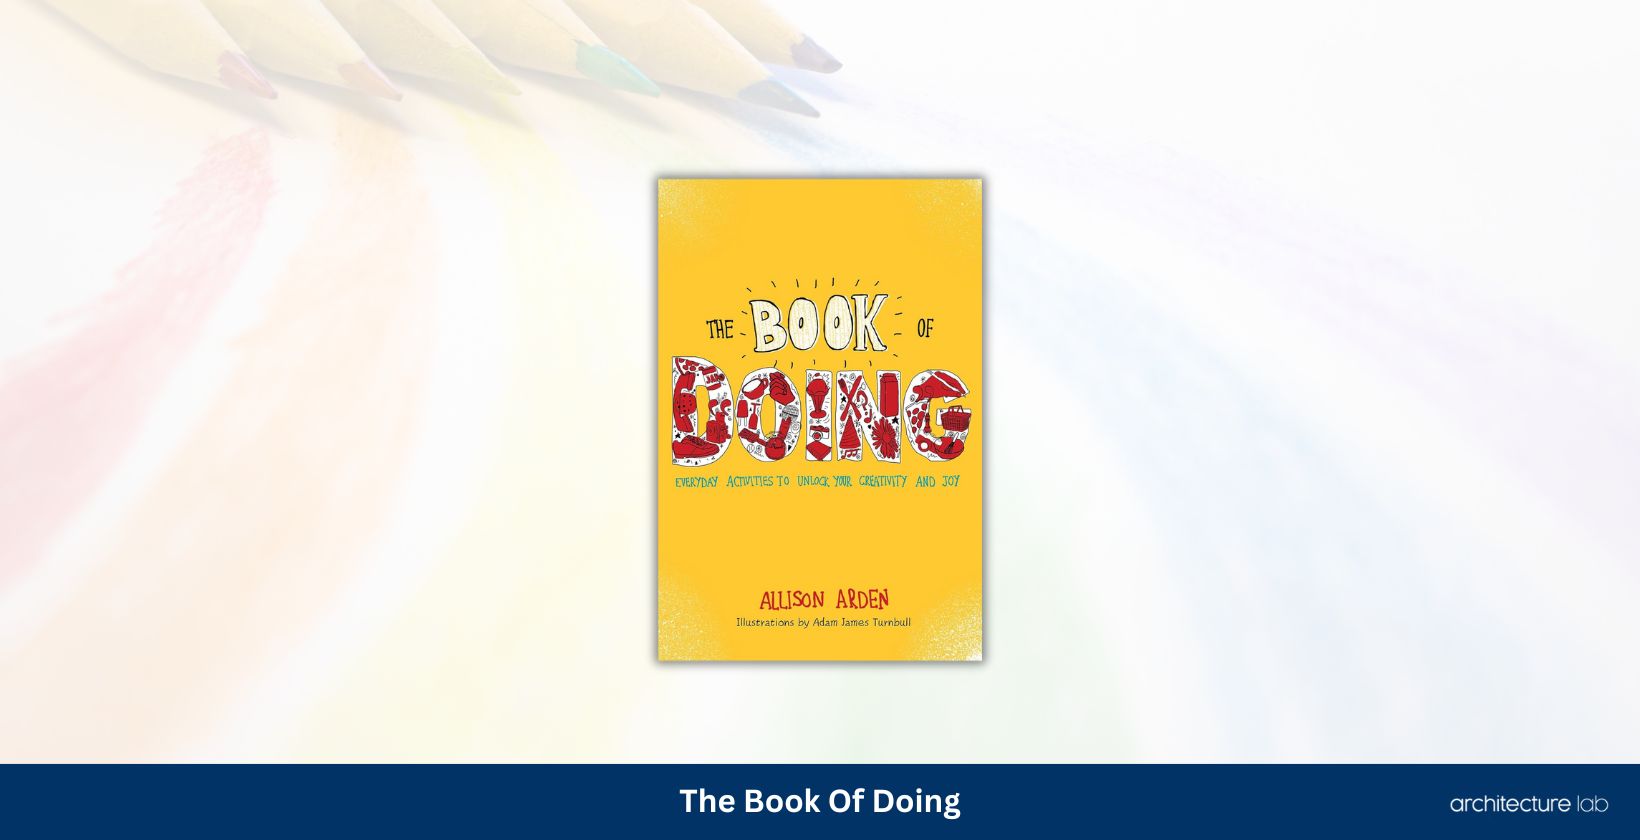 The book of doing